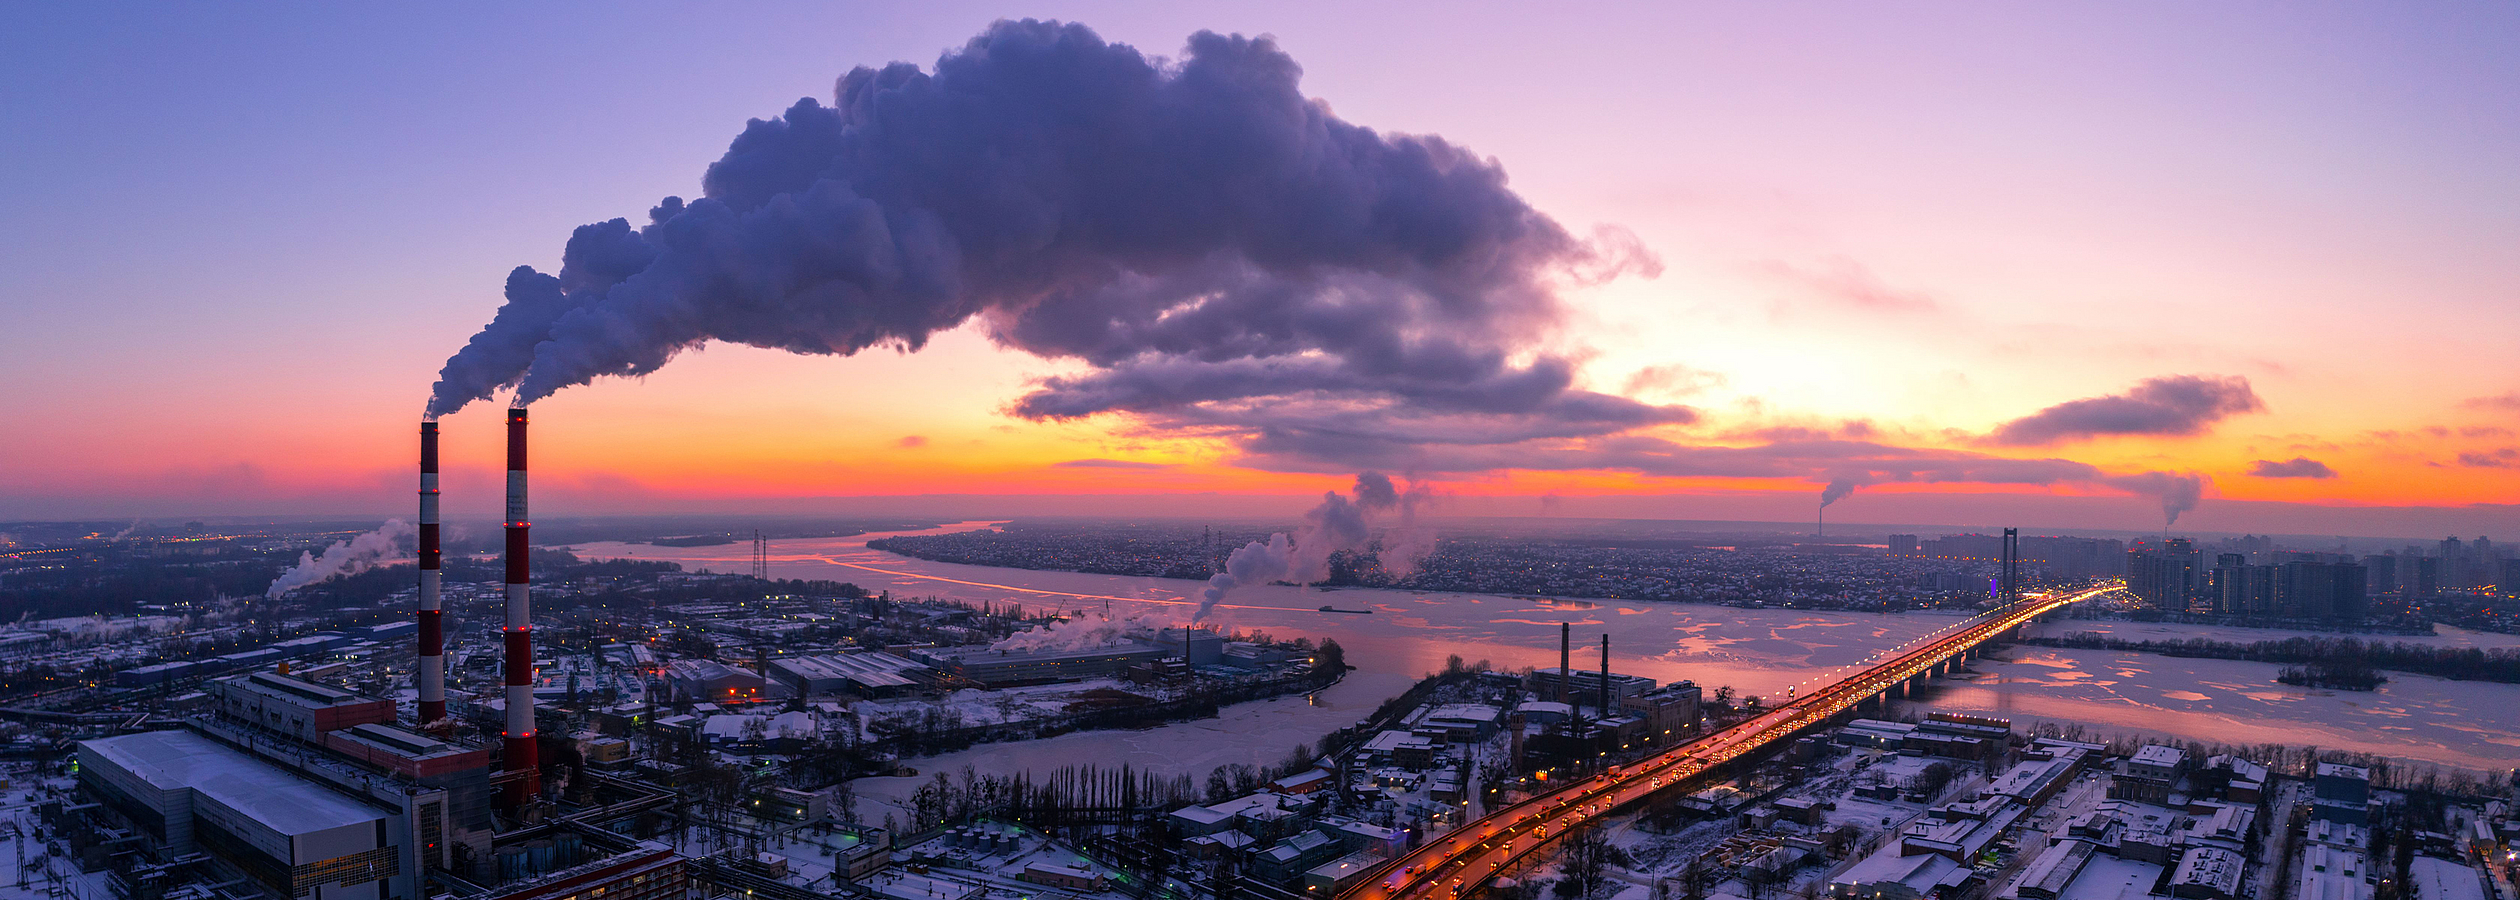 Aerial view of a city on the river at sunrise. A large amount of smoke rises from tall factory chimneys.